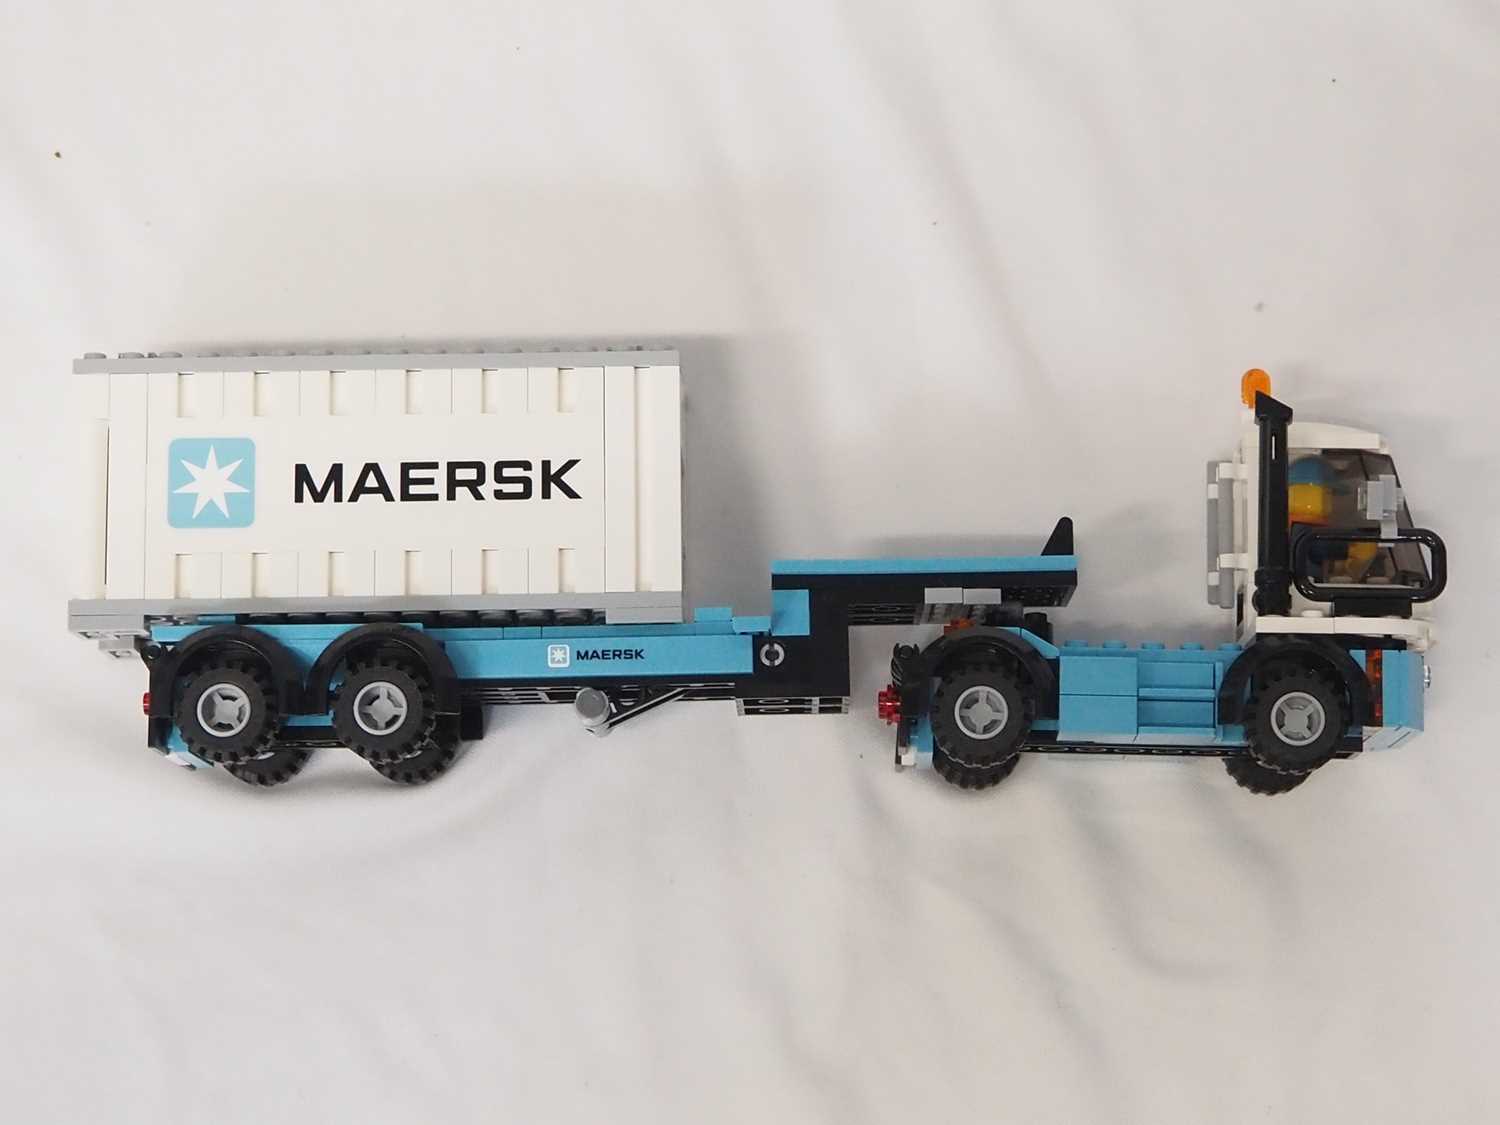 LEGO - TRAIN #10219 RC Train - Maersk Container Train - appears complete, no instructions, boxed - Image 6 of 7